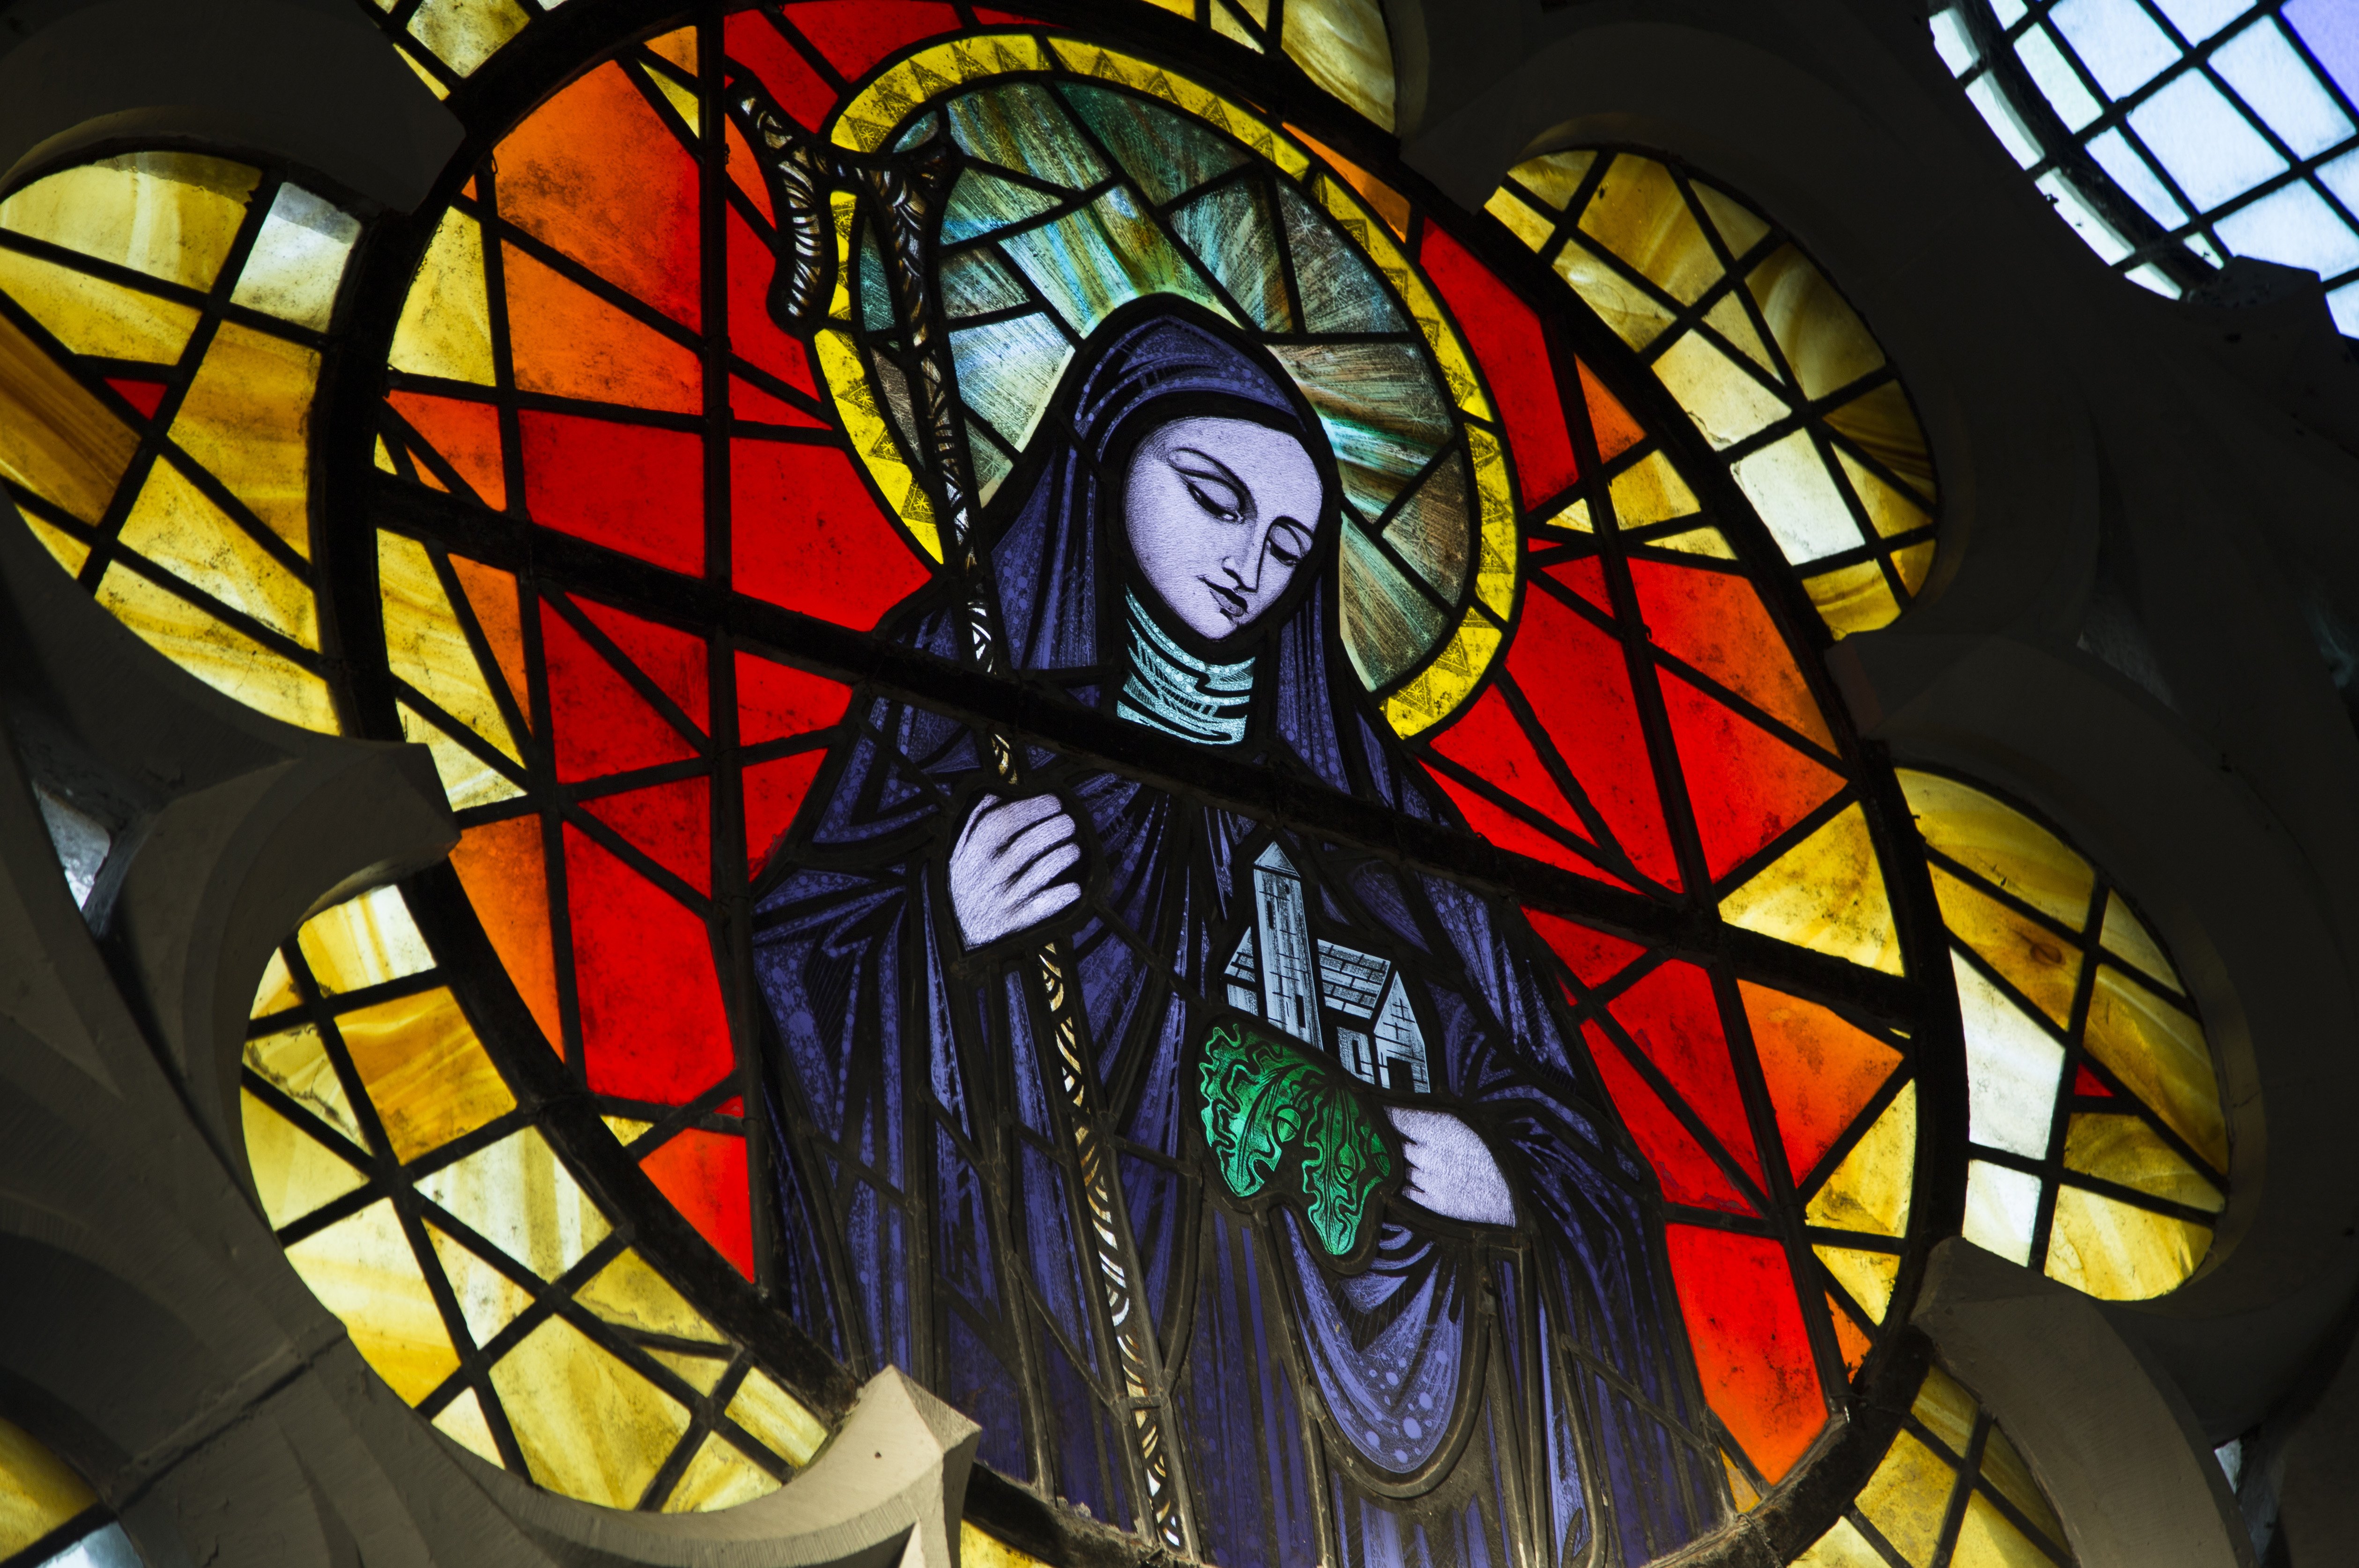 St. Brigid of Kildare is pictured in a stained-glass window in St. Brigid's Church Jan. 20 in Crosshaven, a village in County Cork, Ireland. (CNS/Cillian Kelly)